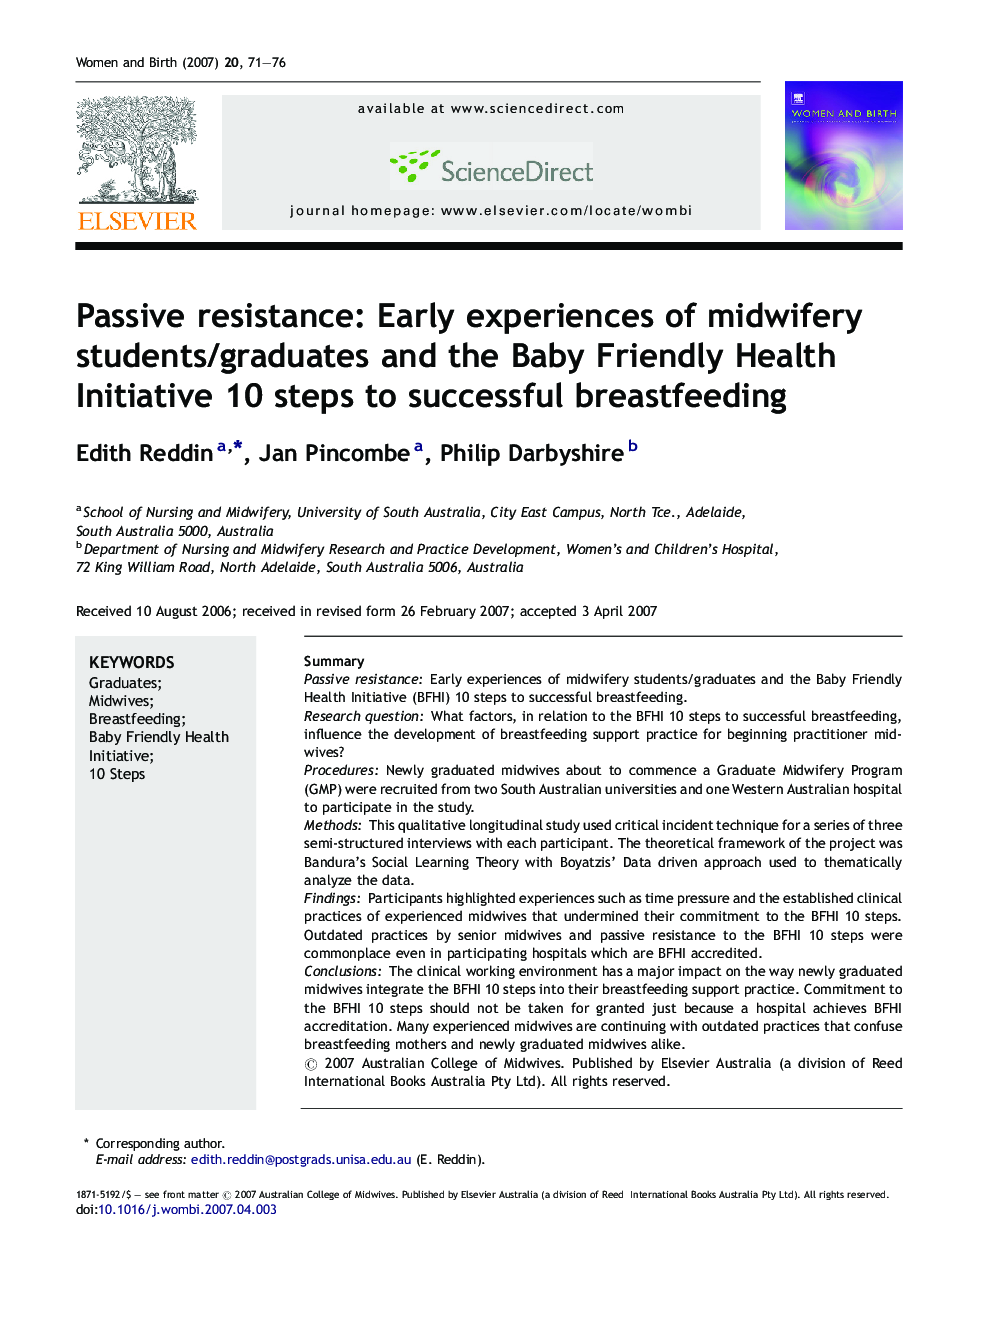 Passive resistance: Early experiences of midwifery students/graduates and the Baby Friendly Health Initiative 10 steps to successful breastfeeding